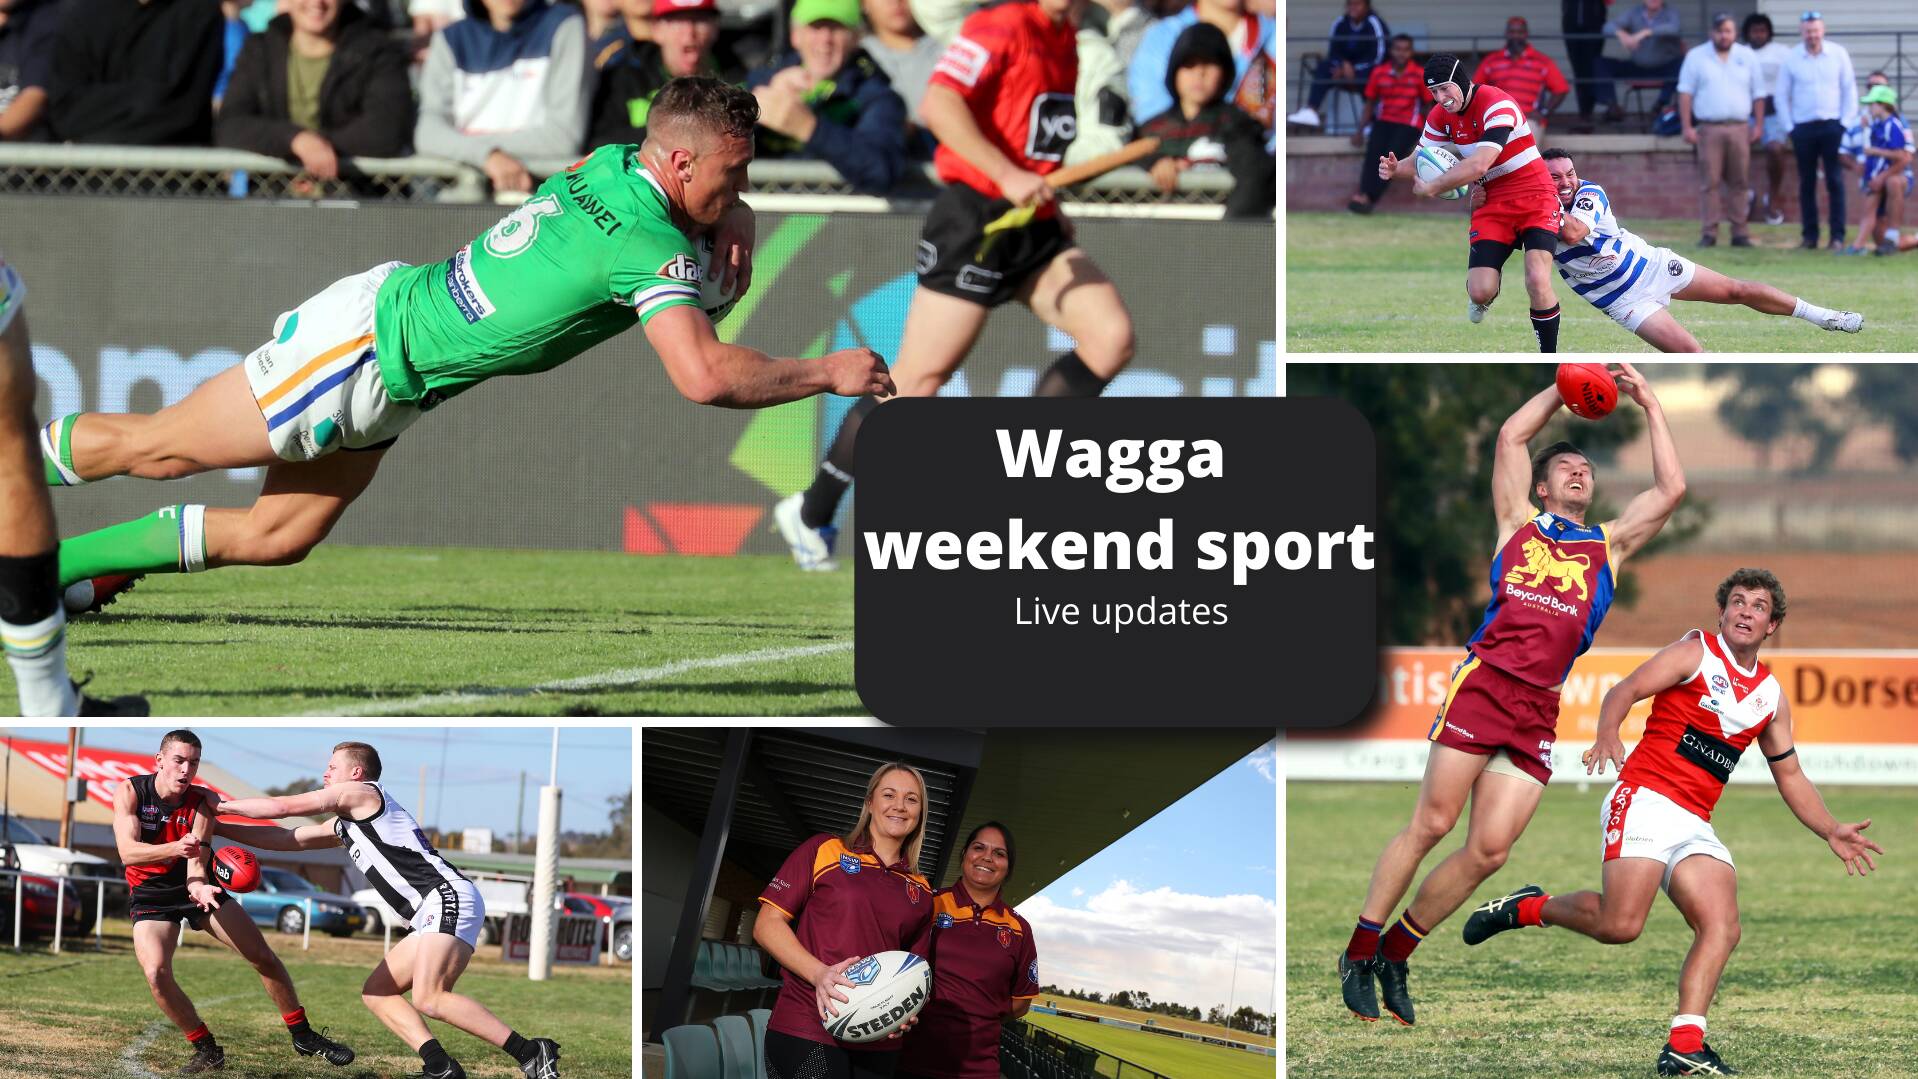 Wagga weekend sport results and updates, May 8-9 Live blog The Daily Advertiser Wagga Wagga, NSW